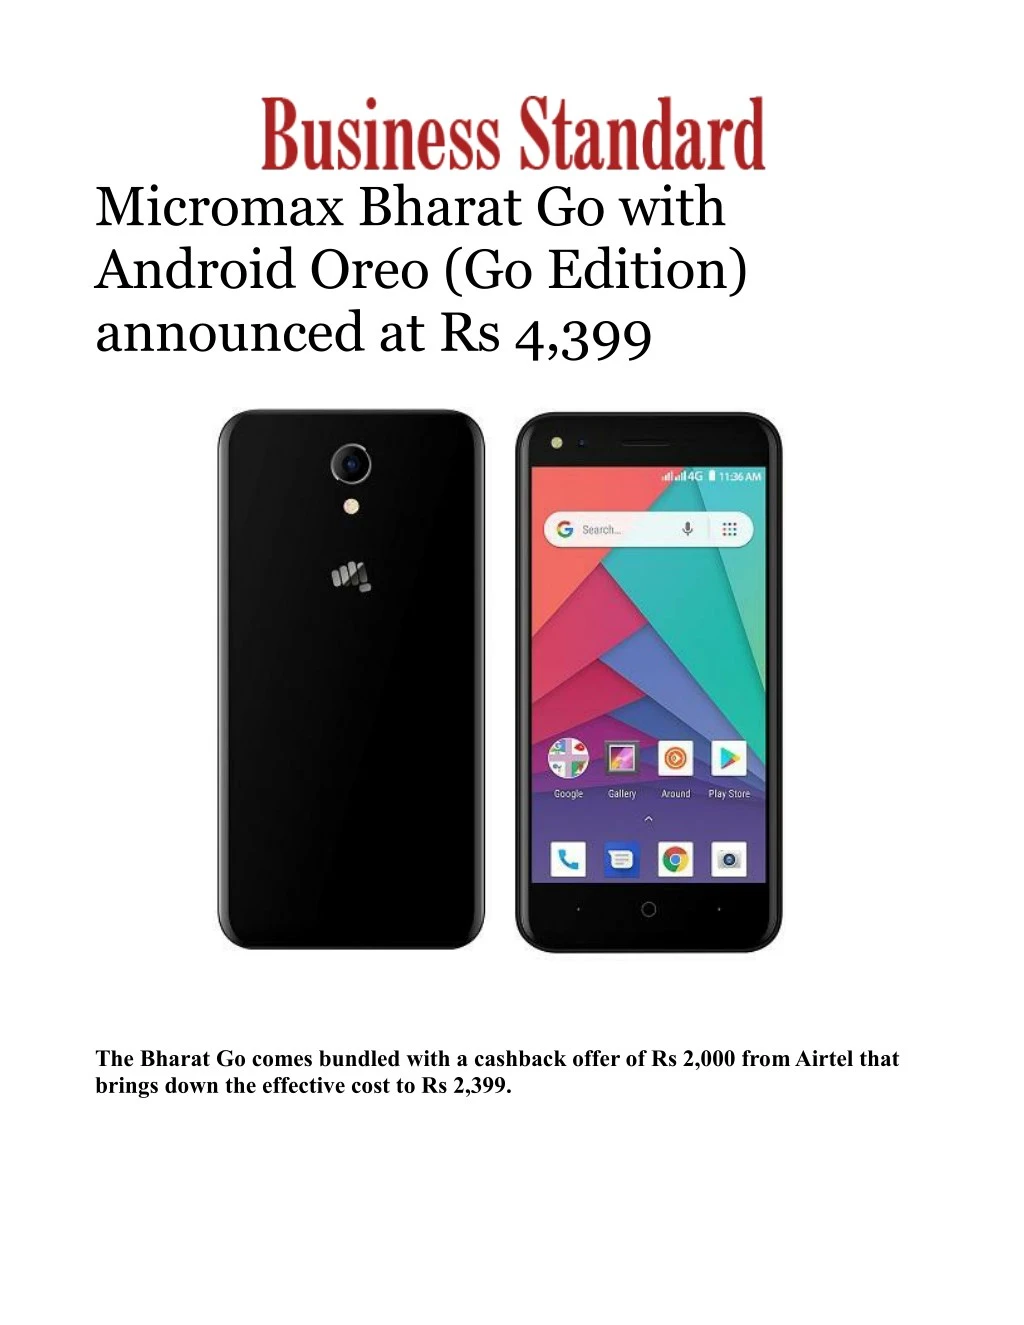 micromax bharat go with android oreo go edition